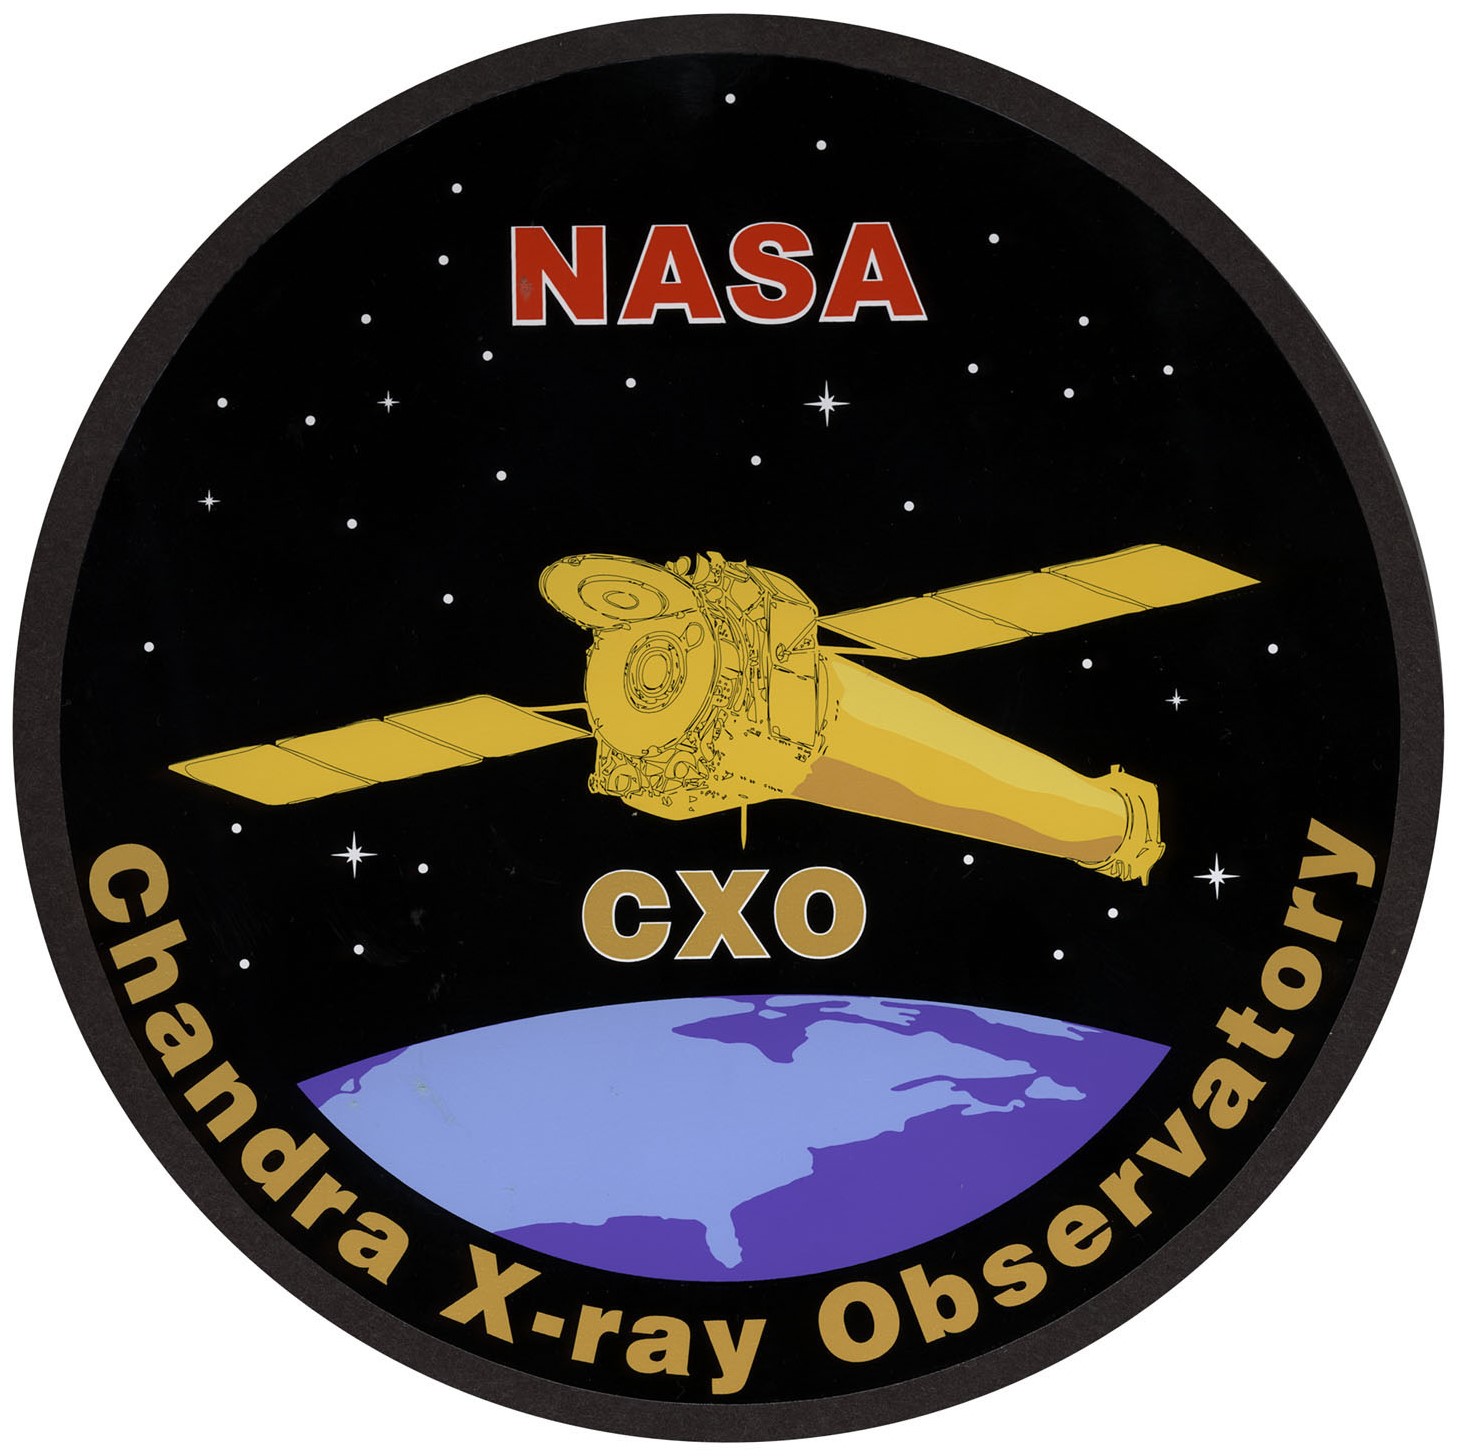 The patch for the Chandra X-ray Observatory